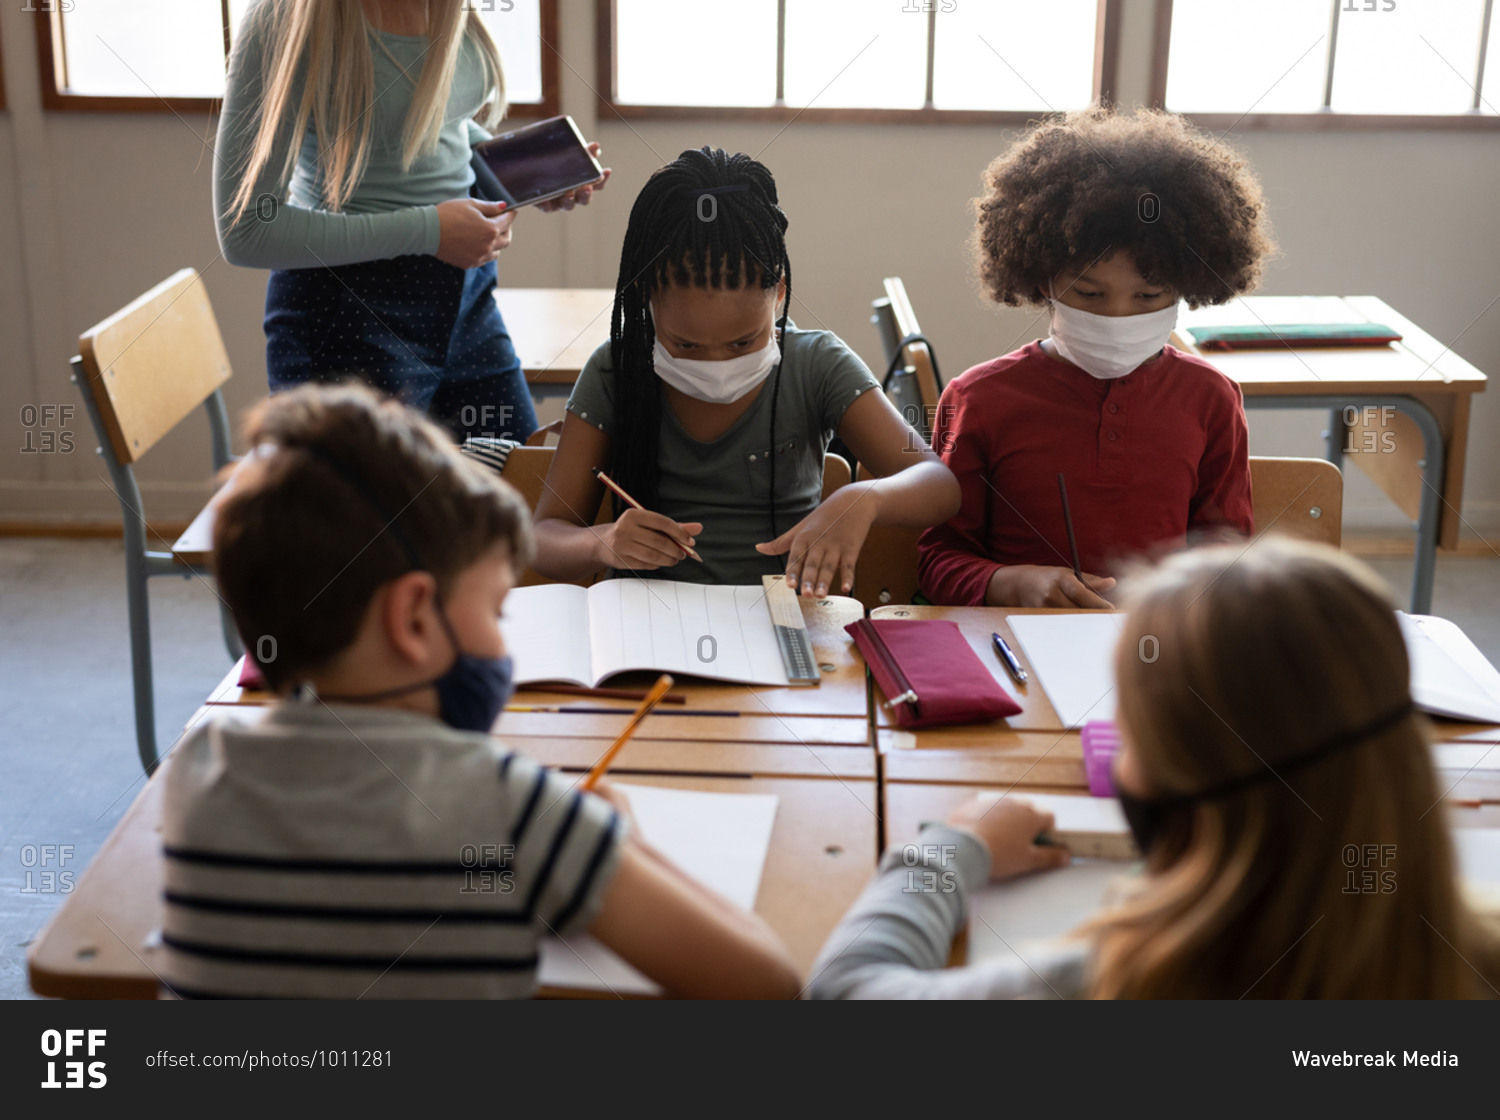 Caucasian female teacher wearing face mask teaching group of multi ethnic kids. Primary education social distancing health safety during Covid19 Coronavirus pandemic.